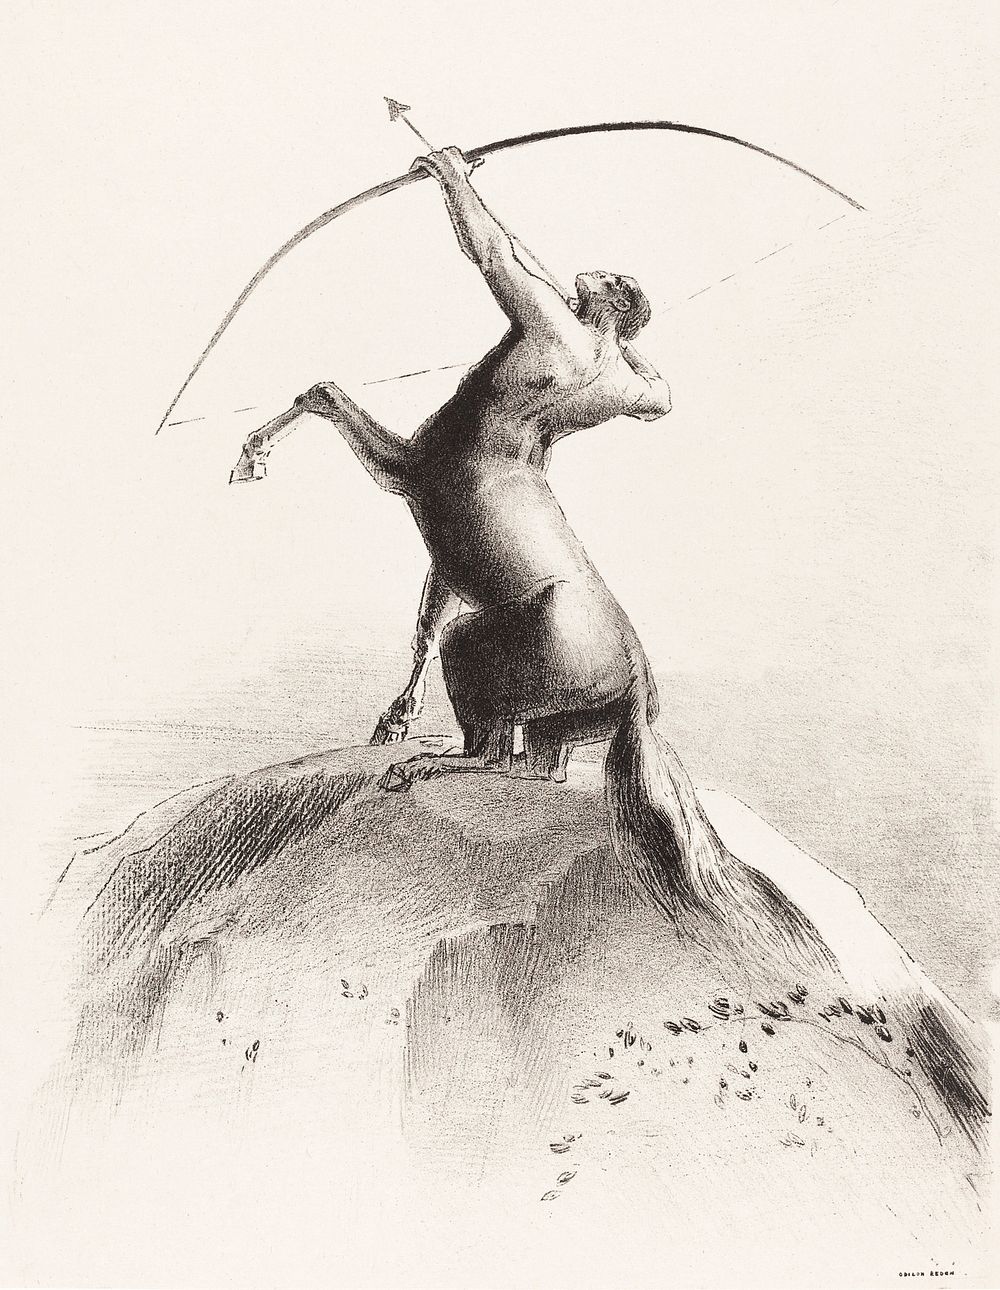 Centaur Aiming at the Clouds (1895) by Odilon Redon. Original from the National Gallery of Art. 